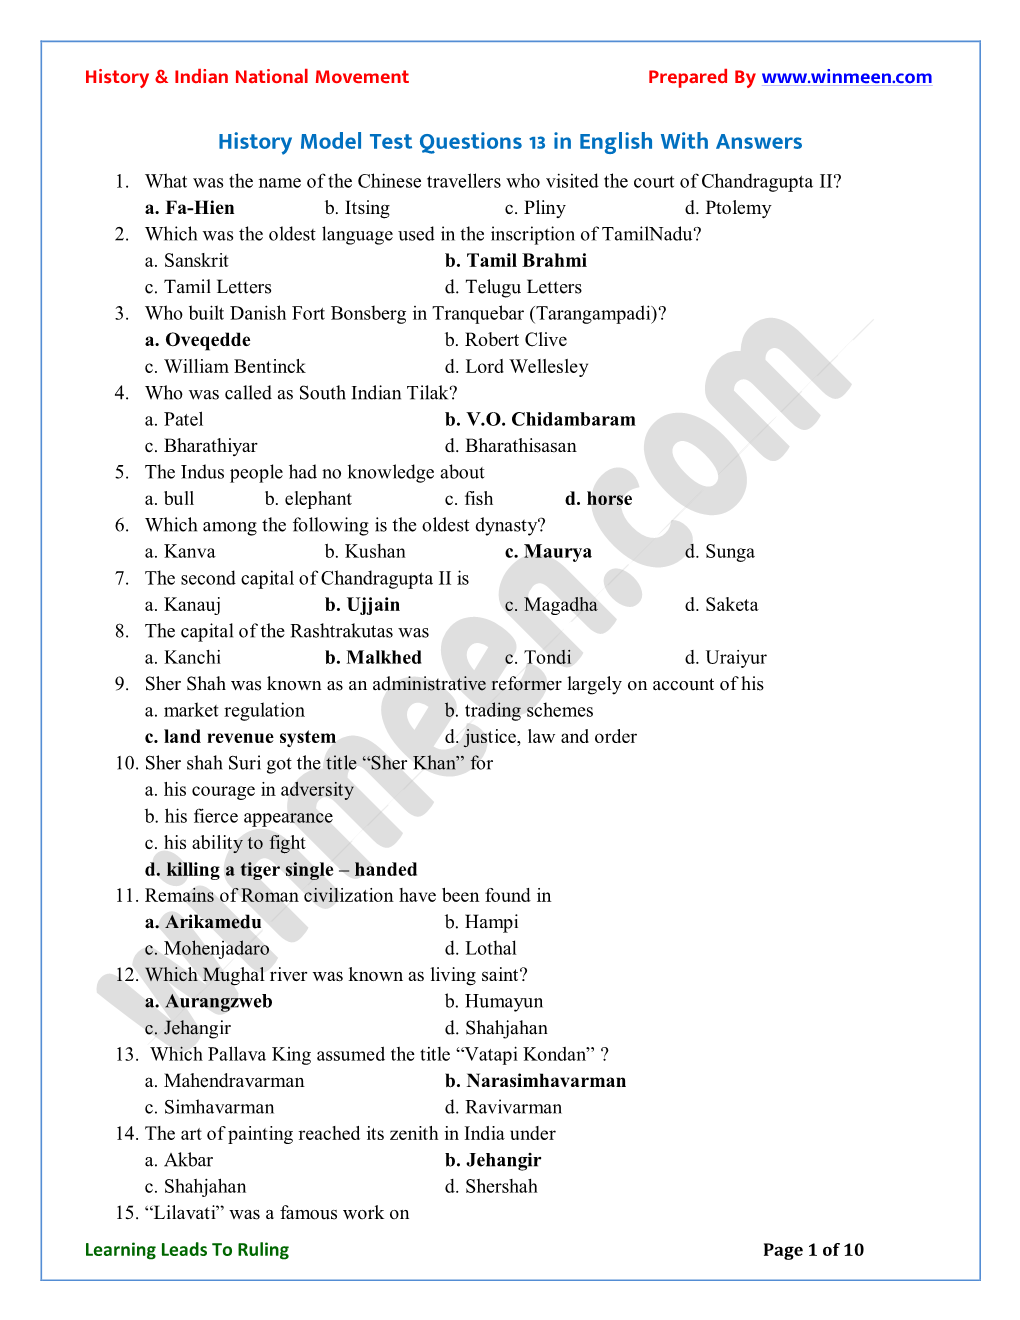 History Model Test Questions 13 in English with Answers 1